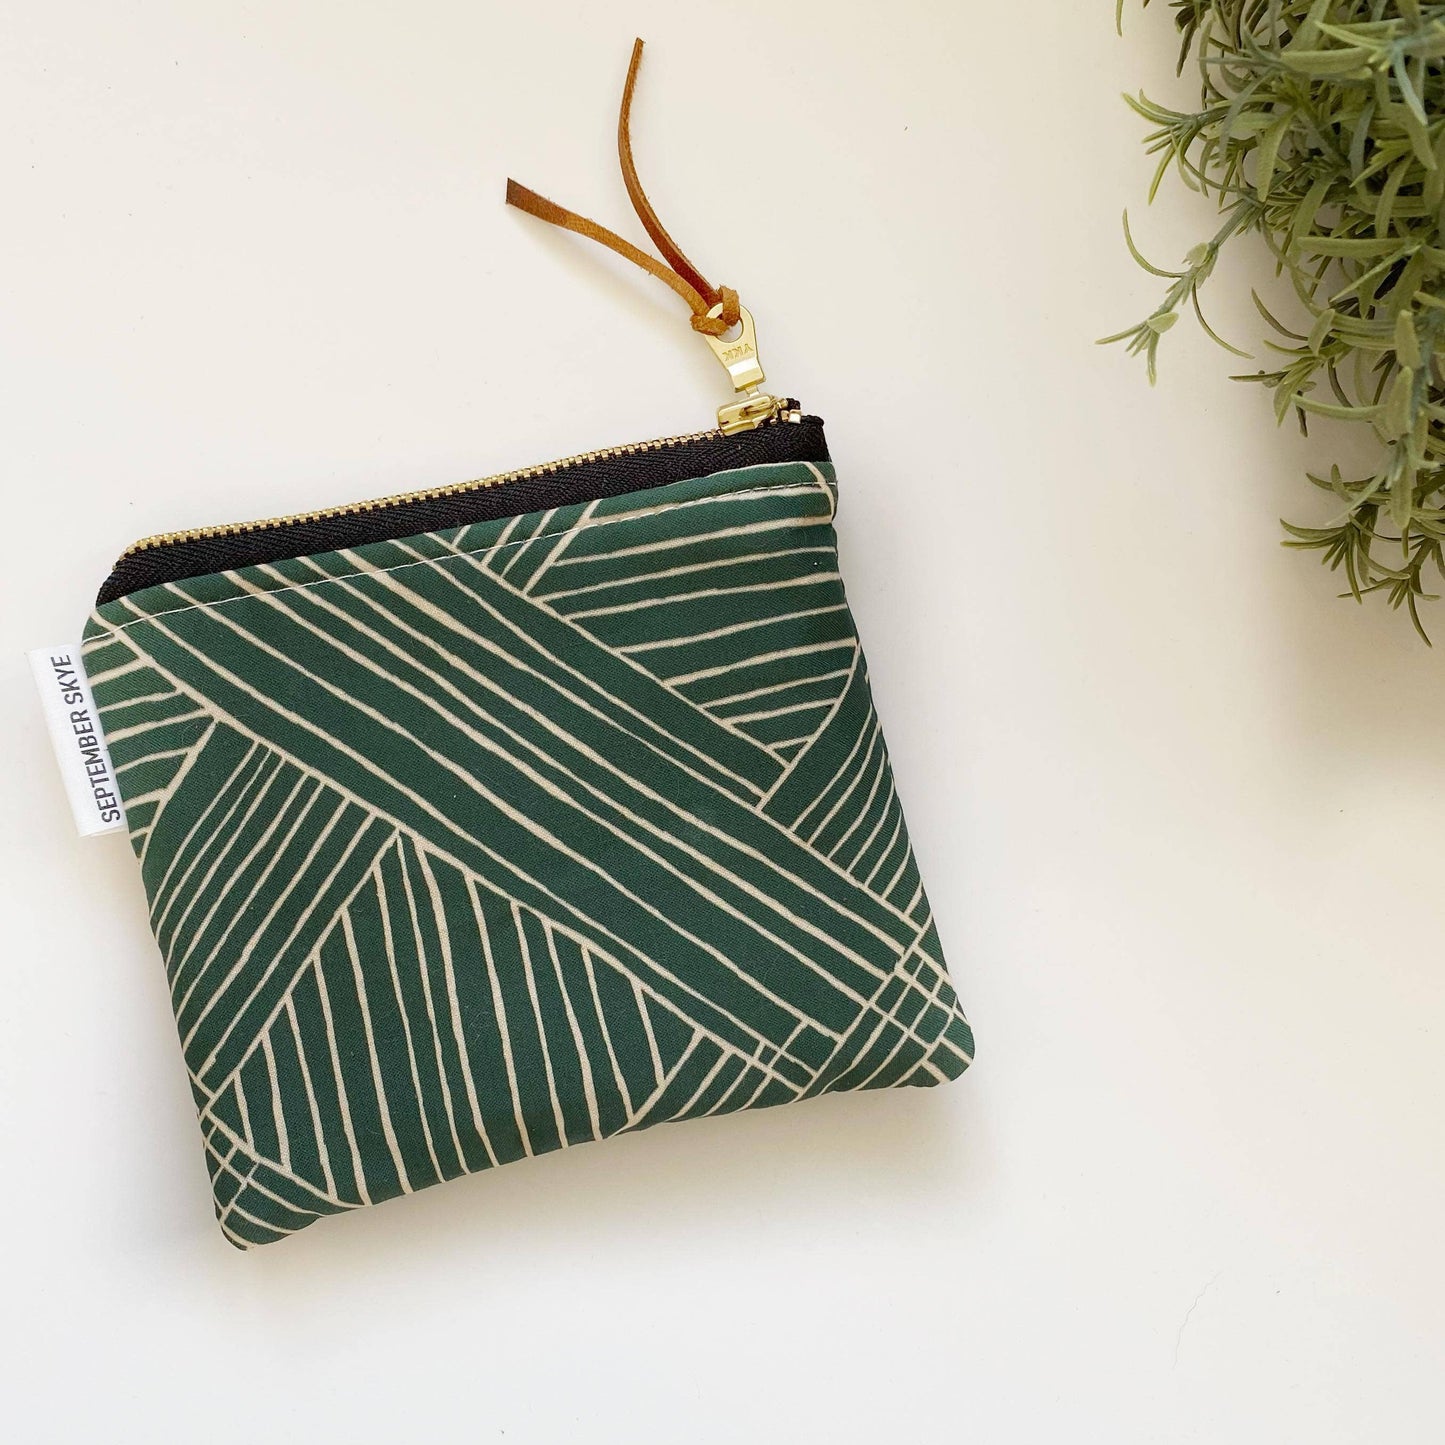 Small square pouch in green and cream geometric Core September Skye Bags & Accessories